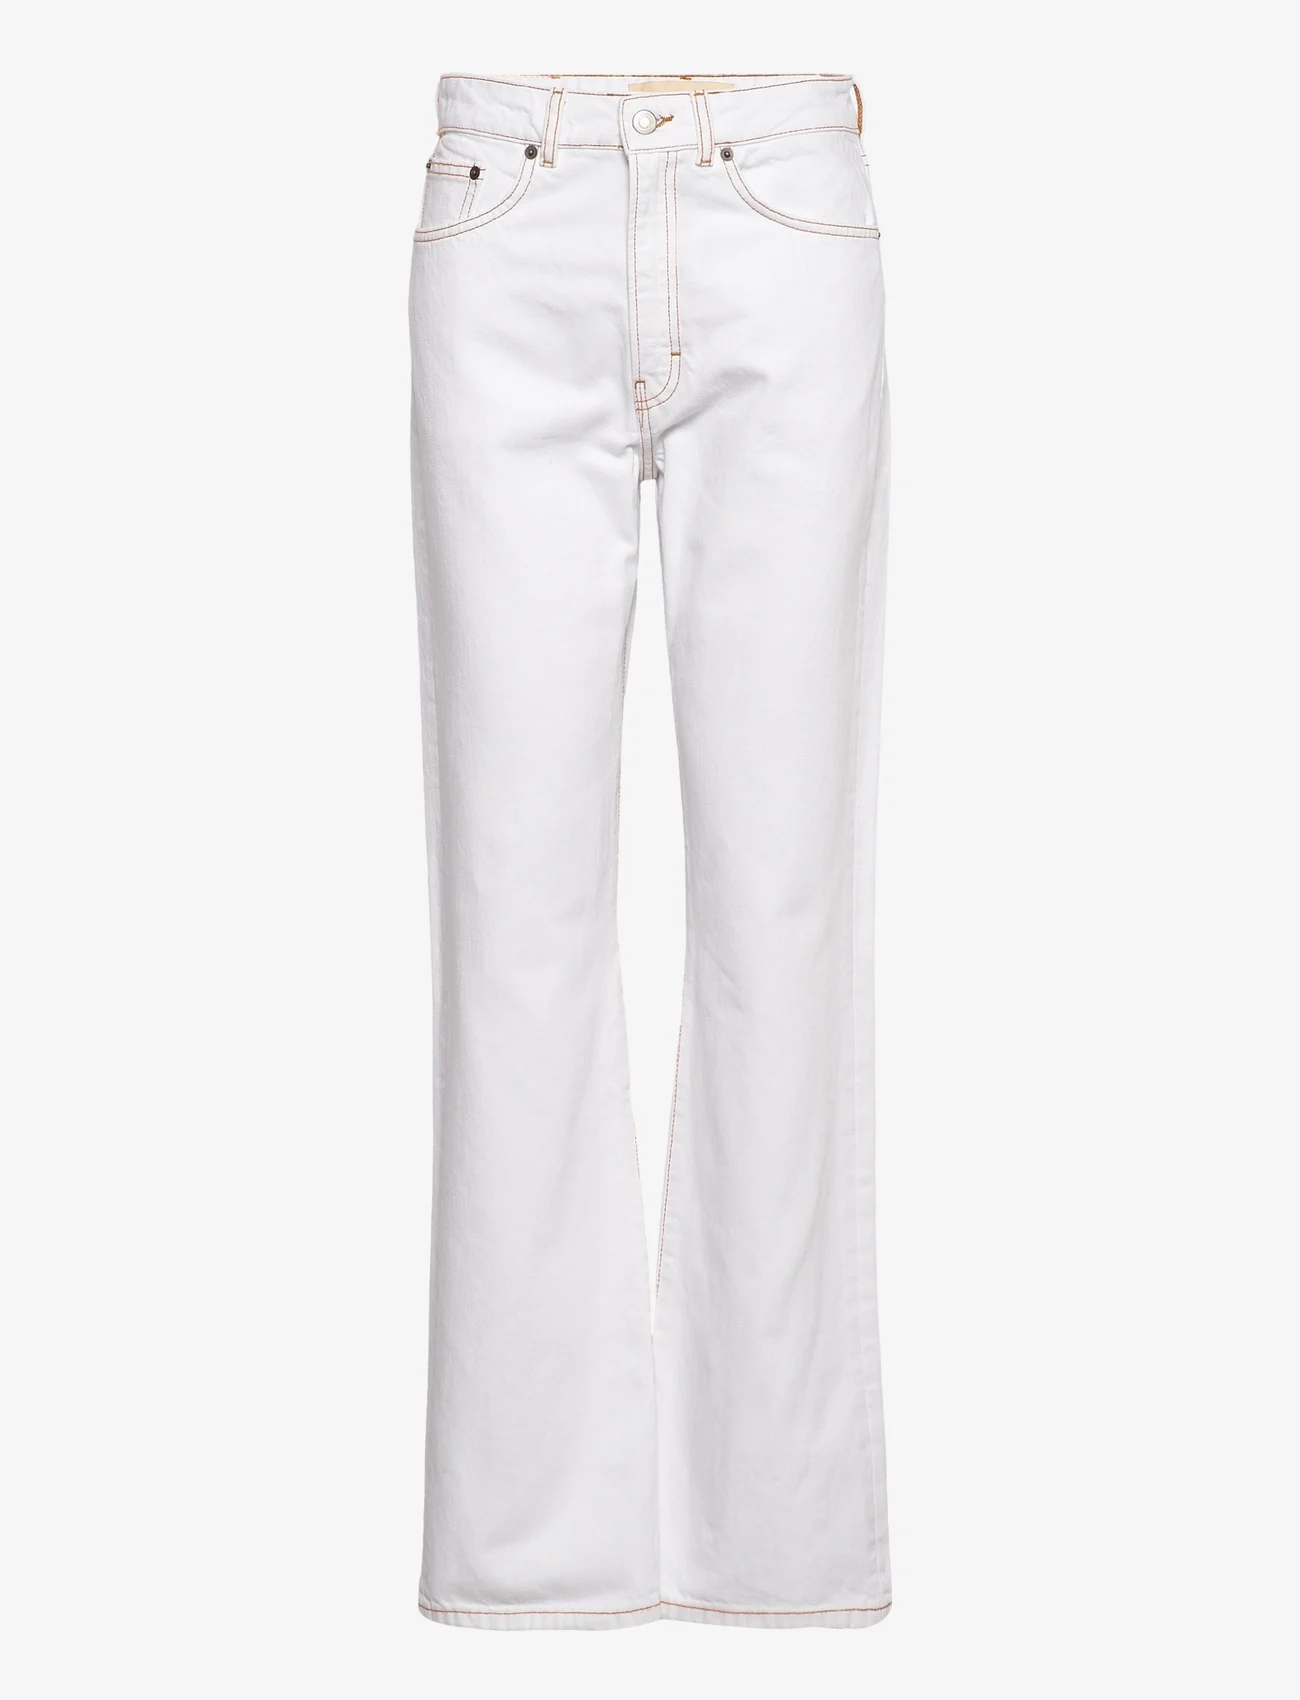 Jeanerica - DW007 Dover Jeans - straight jeans - optic white - 0